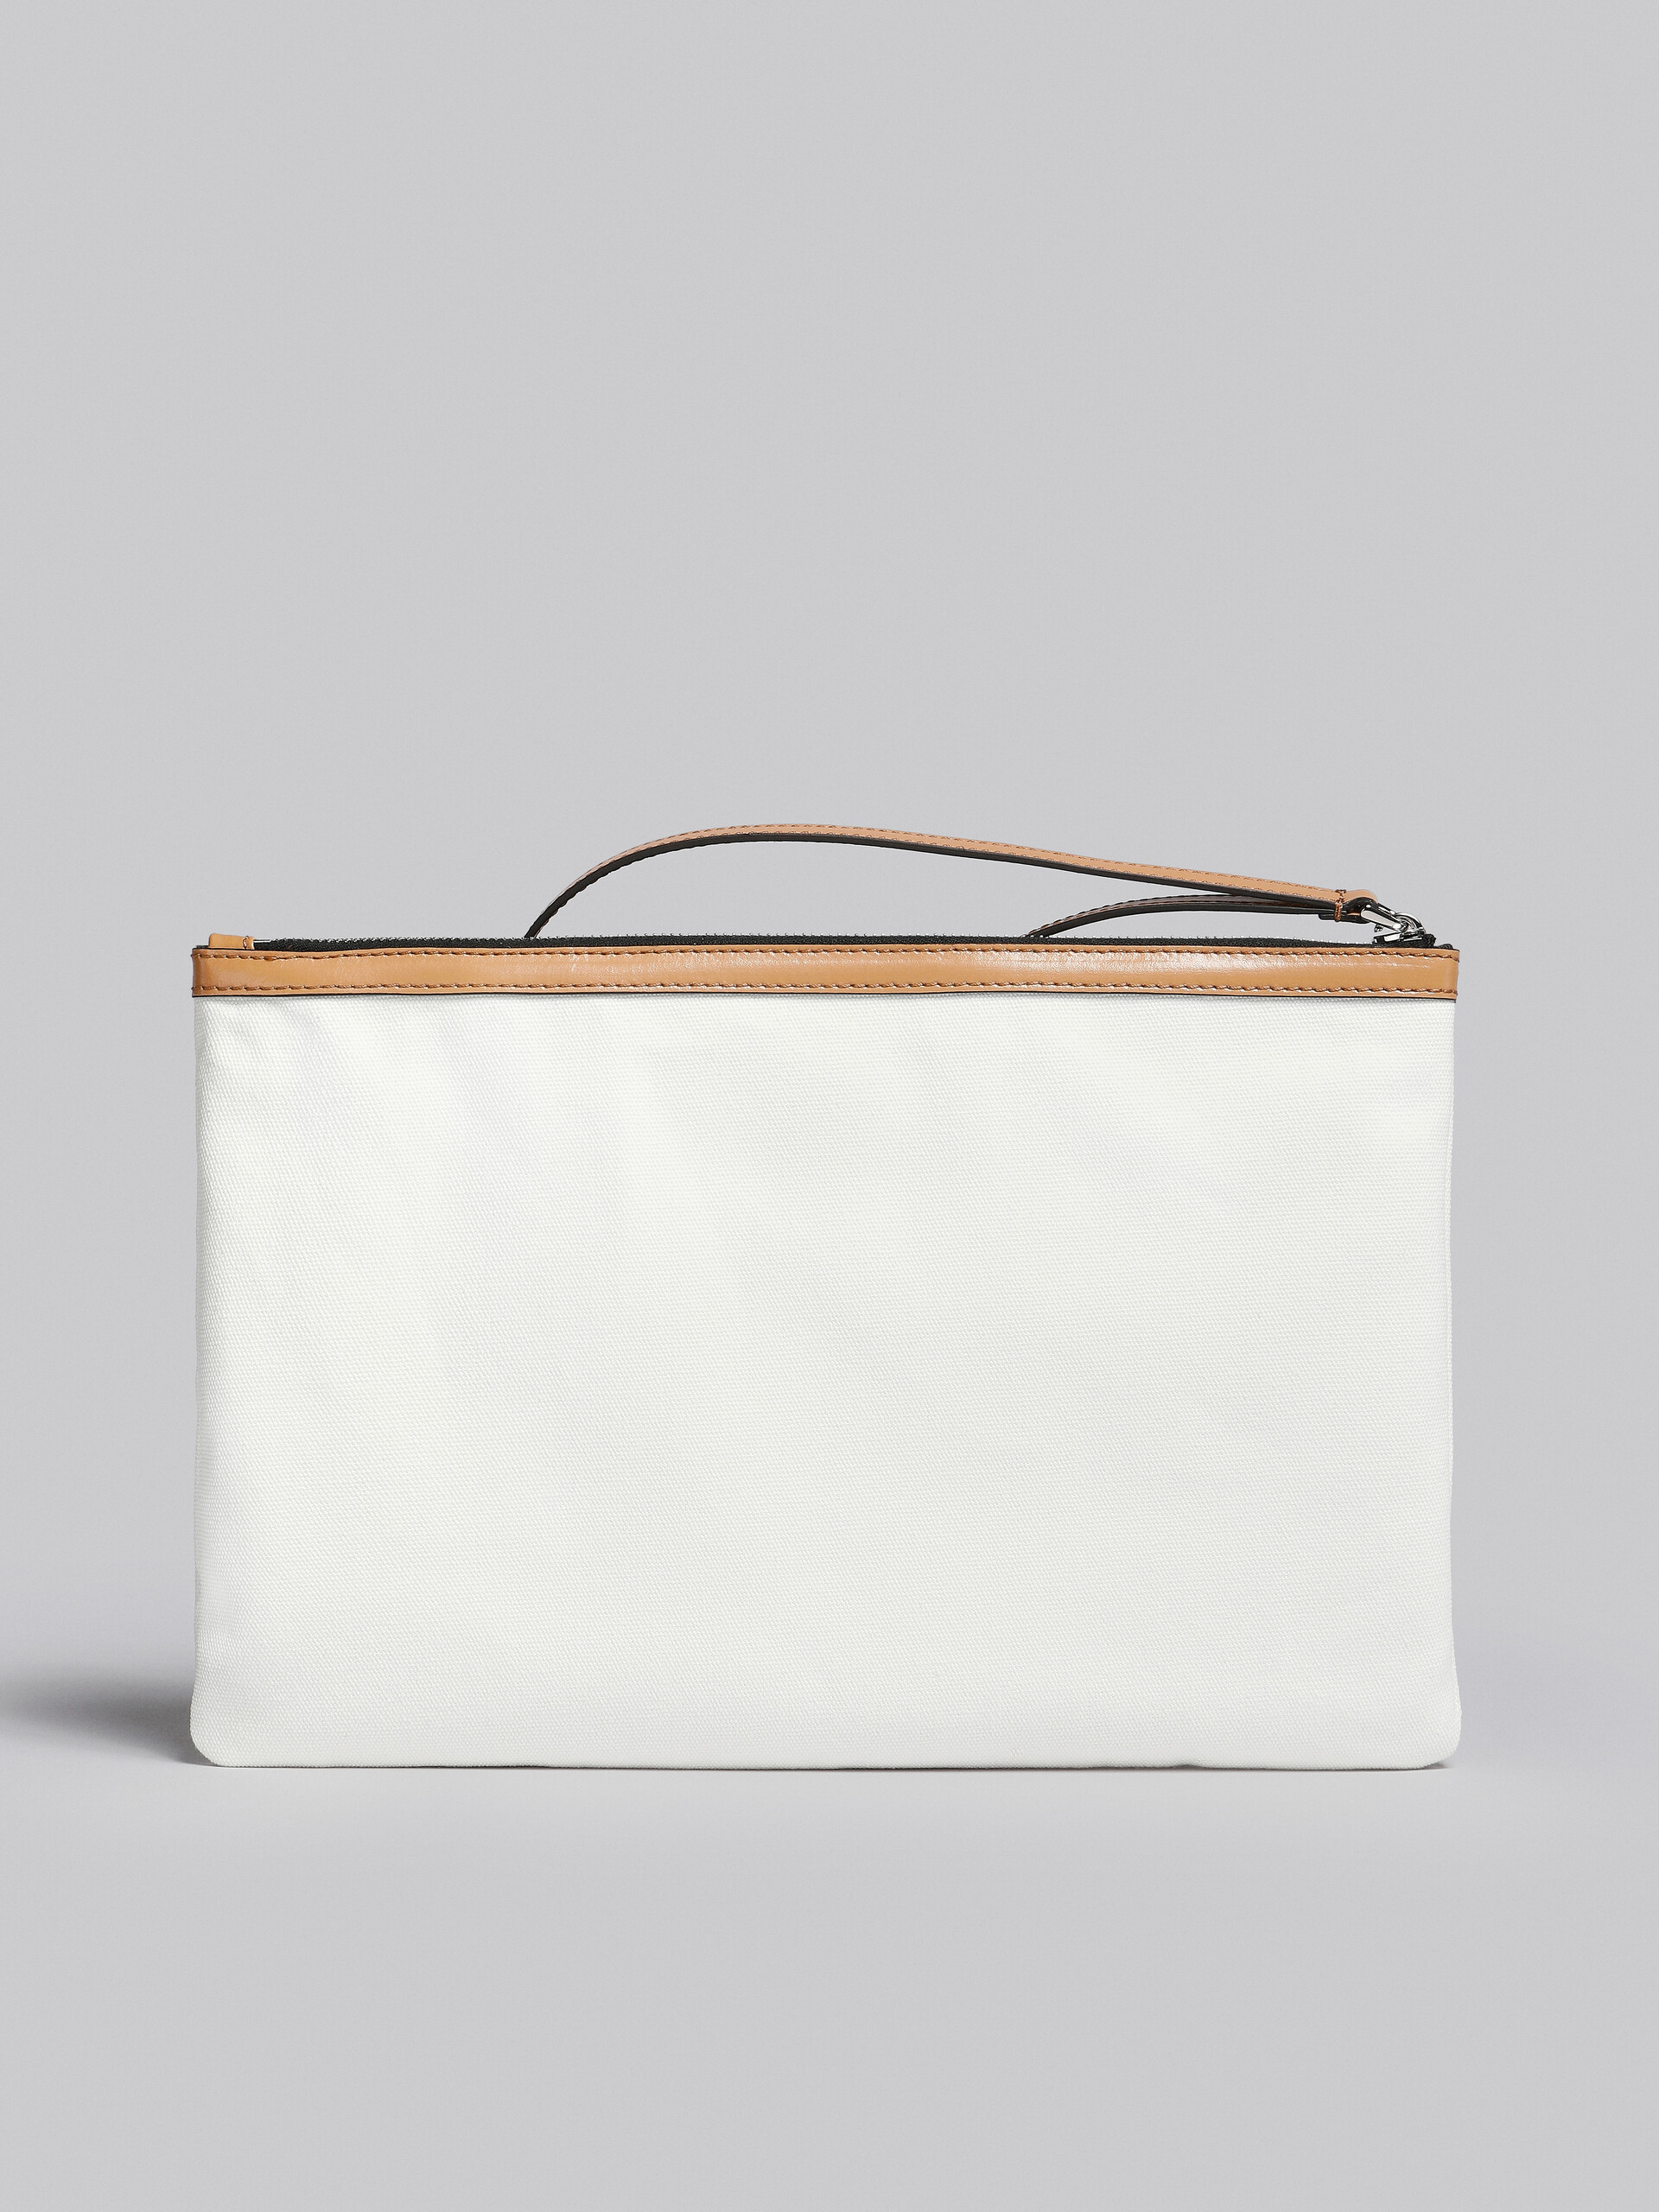 Marni x No Vacancy Inn - Bey Pouch in white canvas with beige trims - Pochette - Image 3